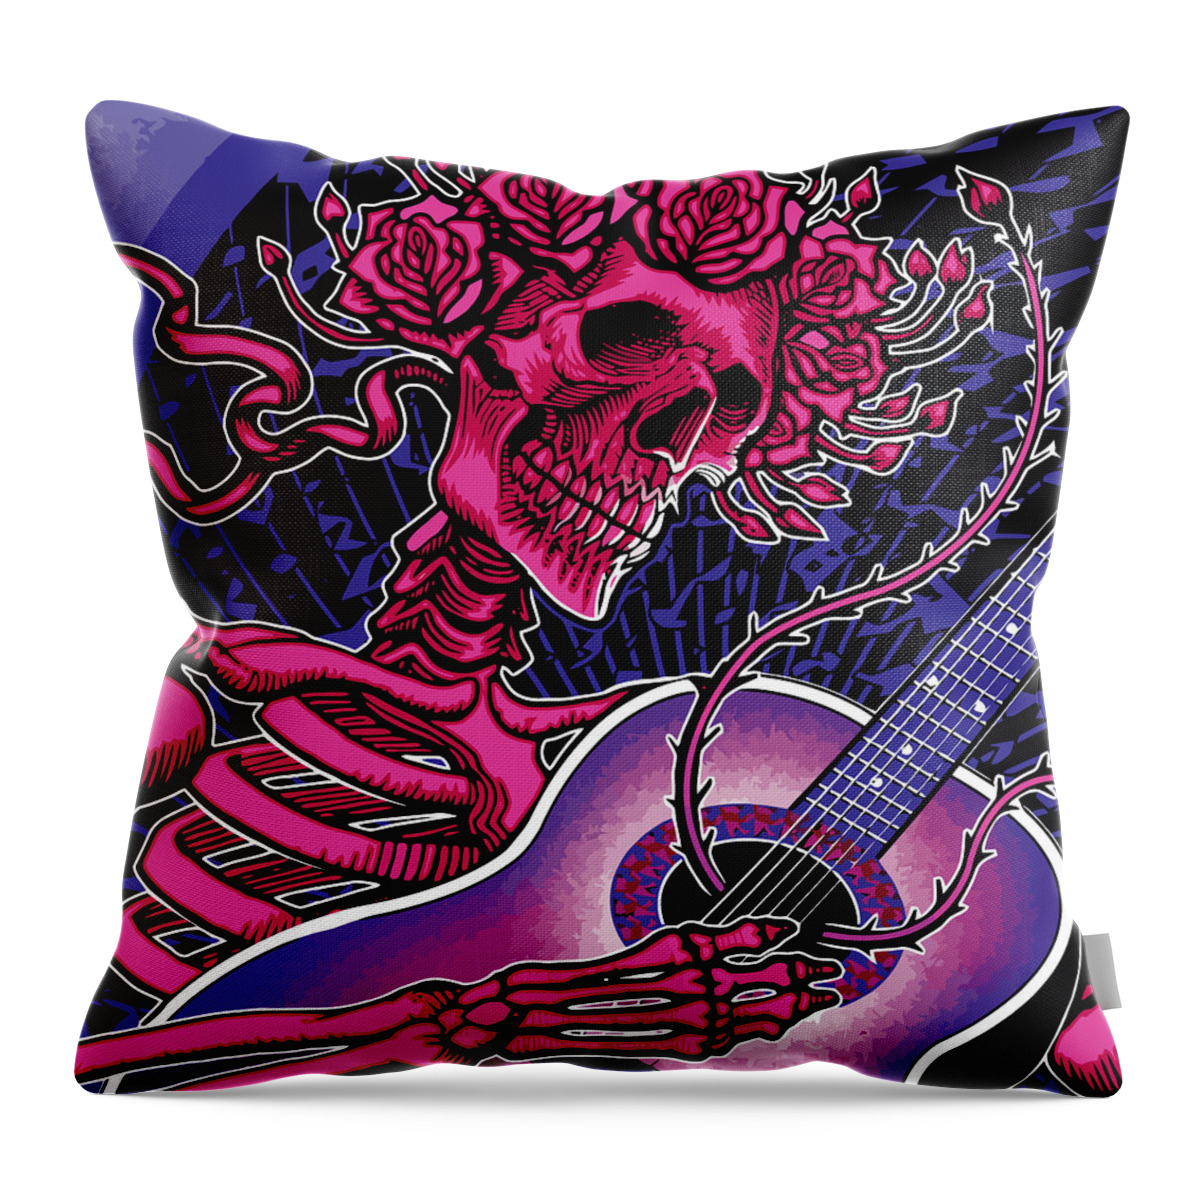 Surfing Throw Pillow featuring the digital art Althea by The Bear